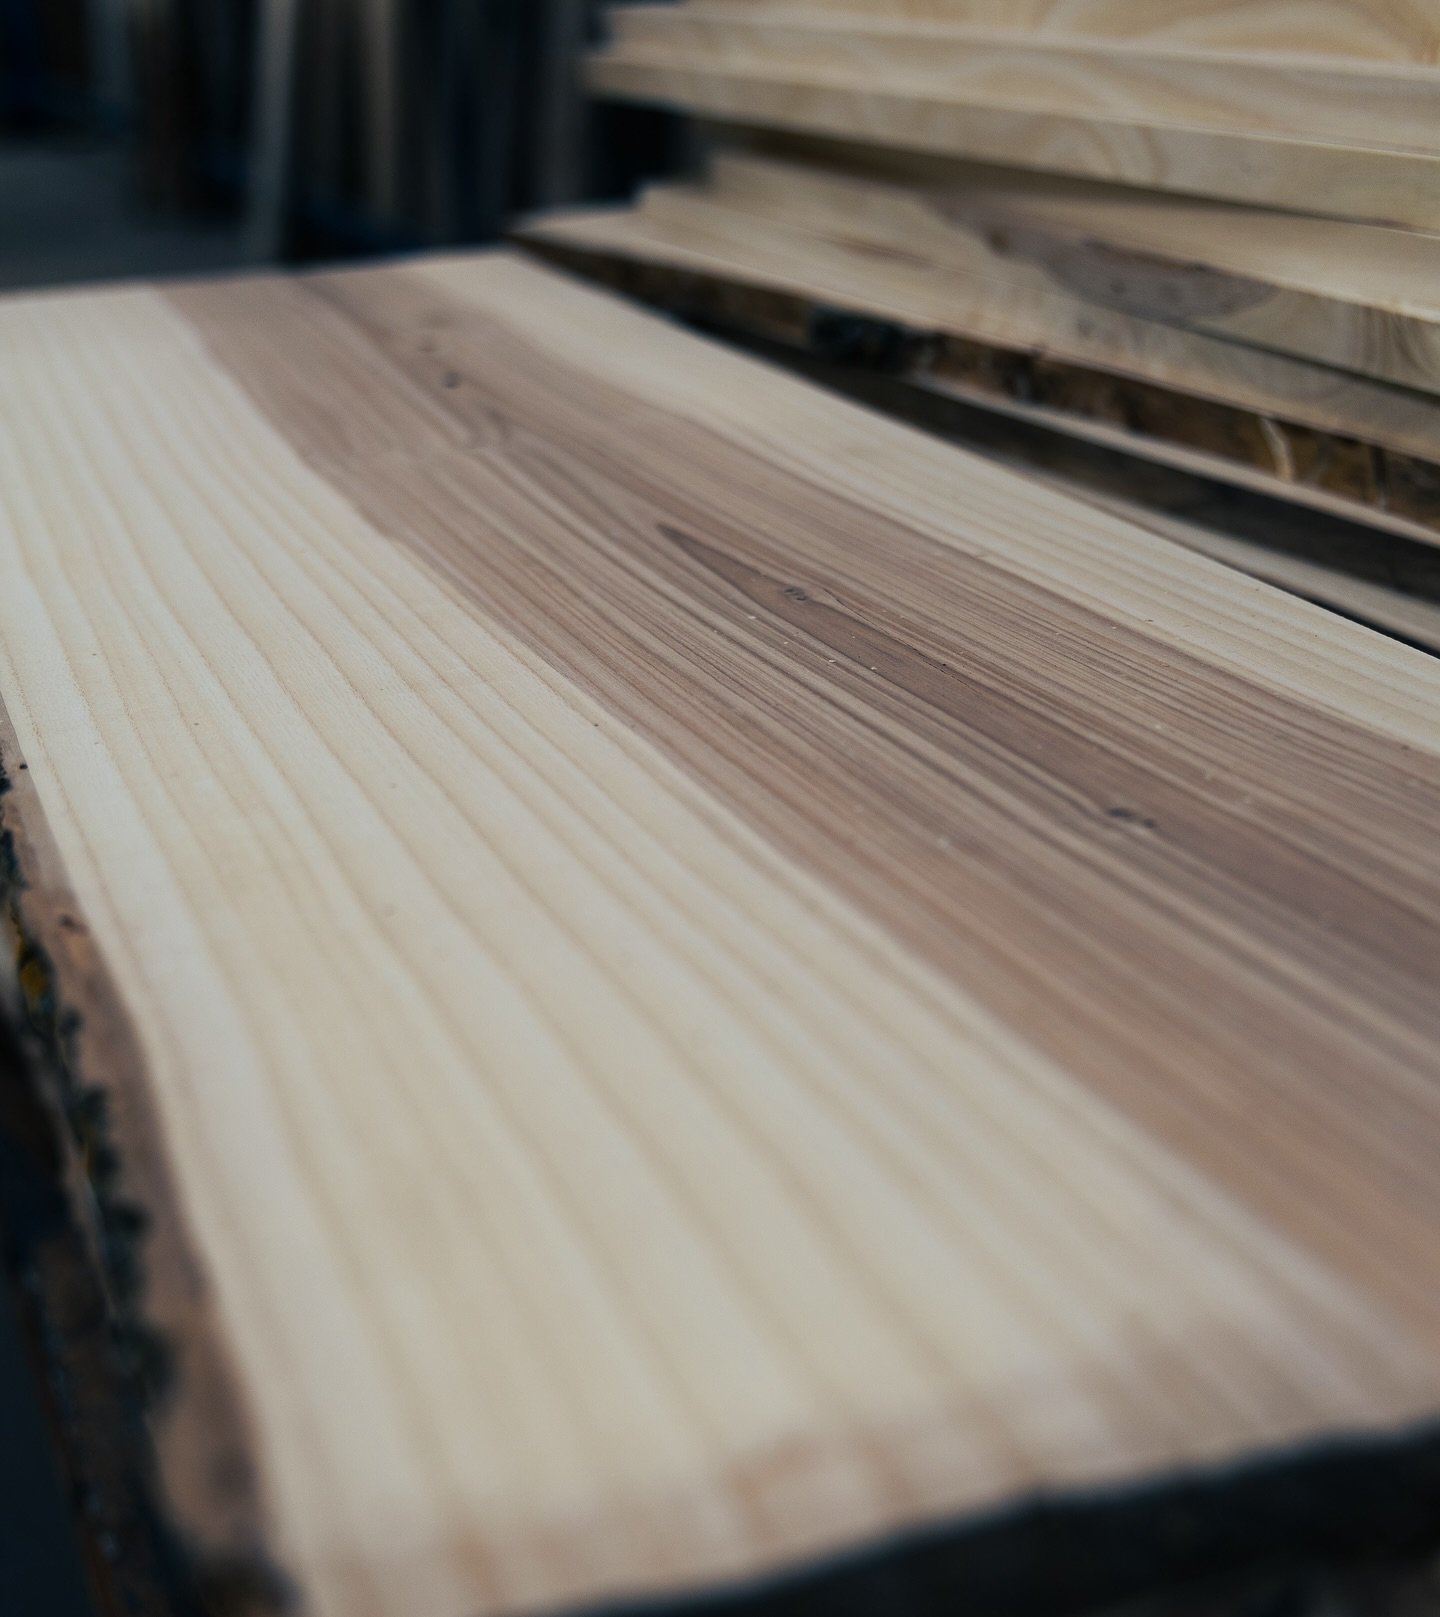 Happy Wednesday, it&rsquo;s Wood Grain Wednesday! 🤩

Today, we&rsquo;re admiring the almost symmetrical lines and the color contrast in this wood&rsquo;s grain.

Share with us what this pattern inspires you to create! 👇

#UrbanLumberCompany #UrbanL